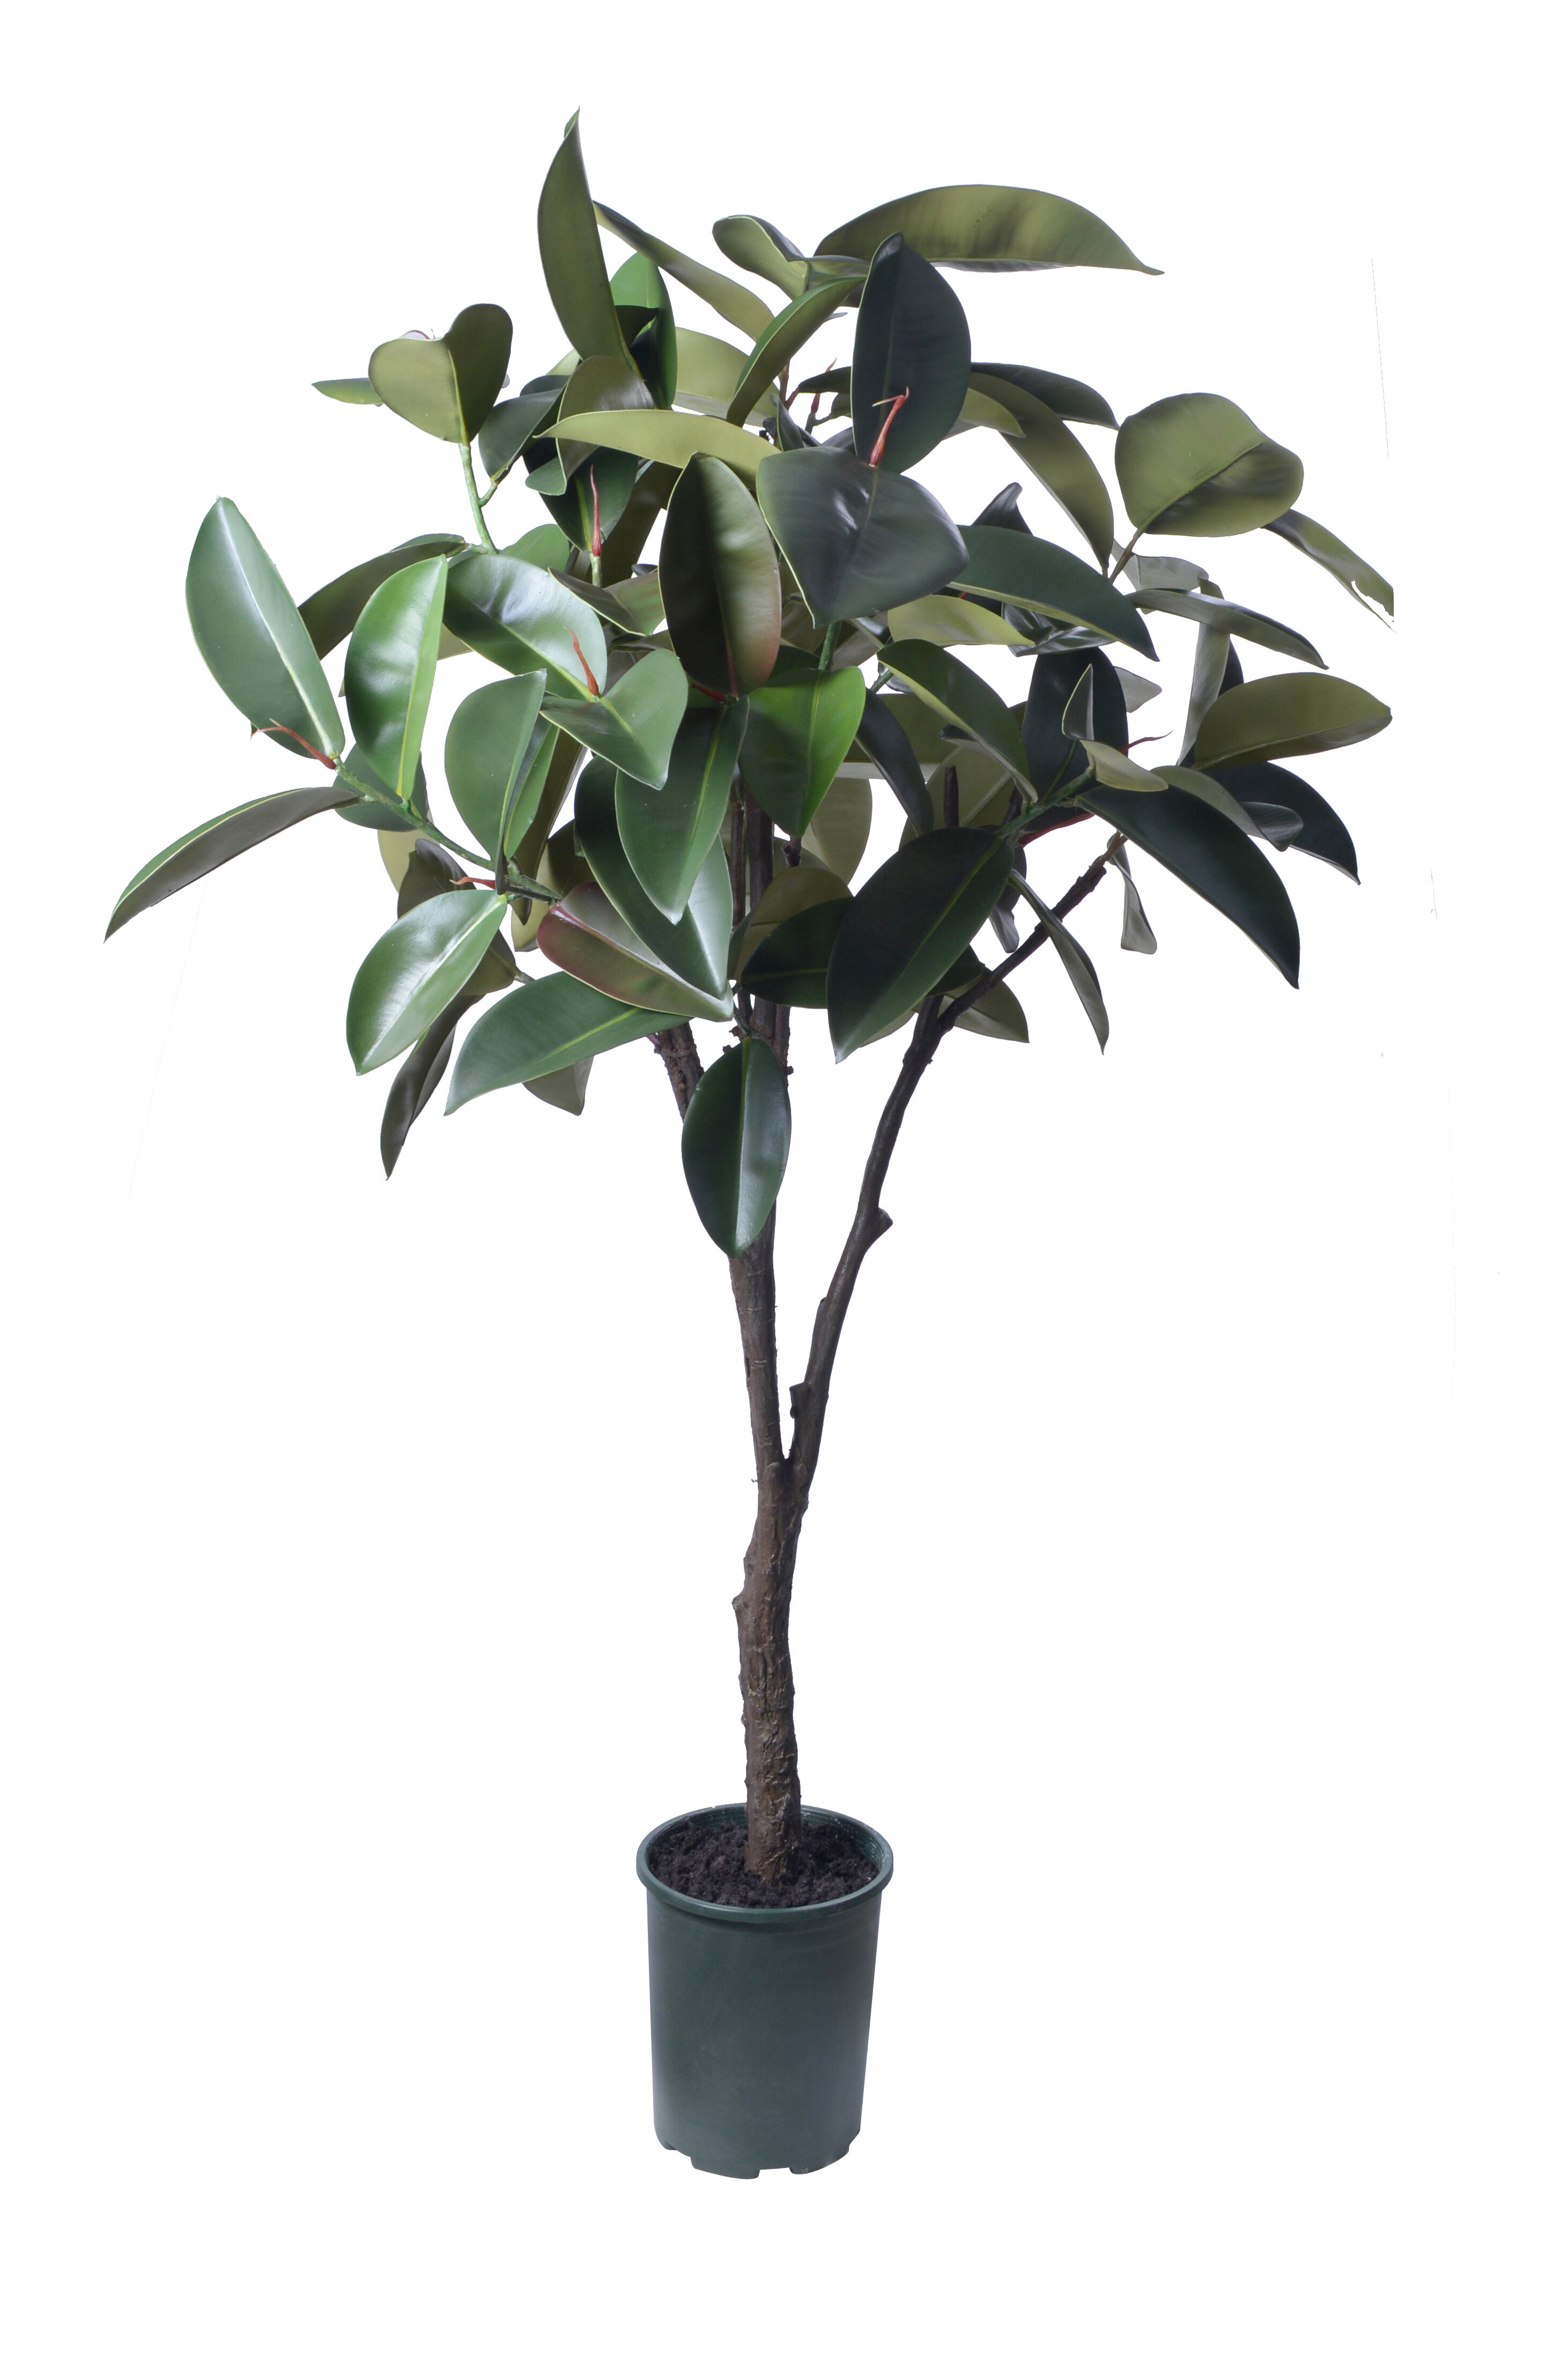 Gracie Oaks Ayleth Artificial Flowers And Plants Rubber Tree In Pot Wayfair Ca